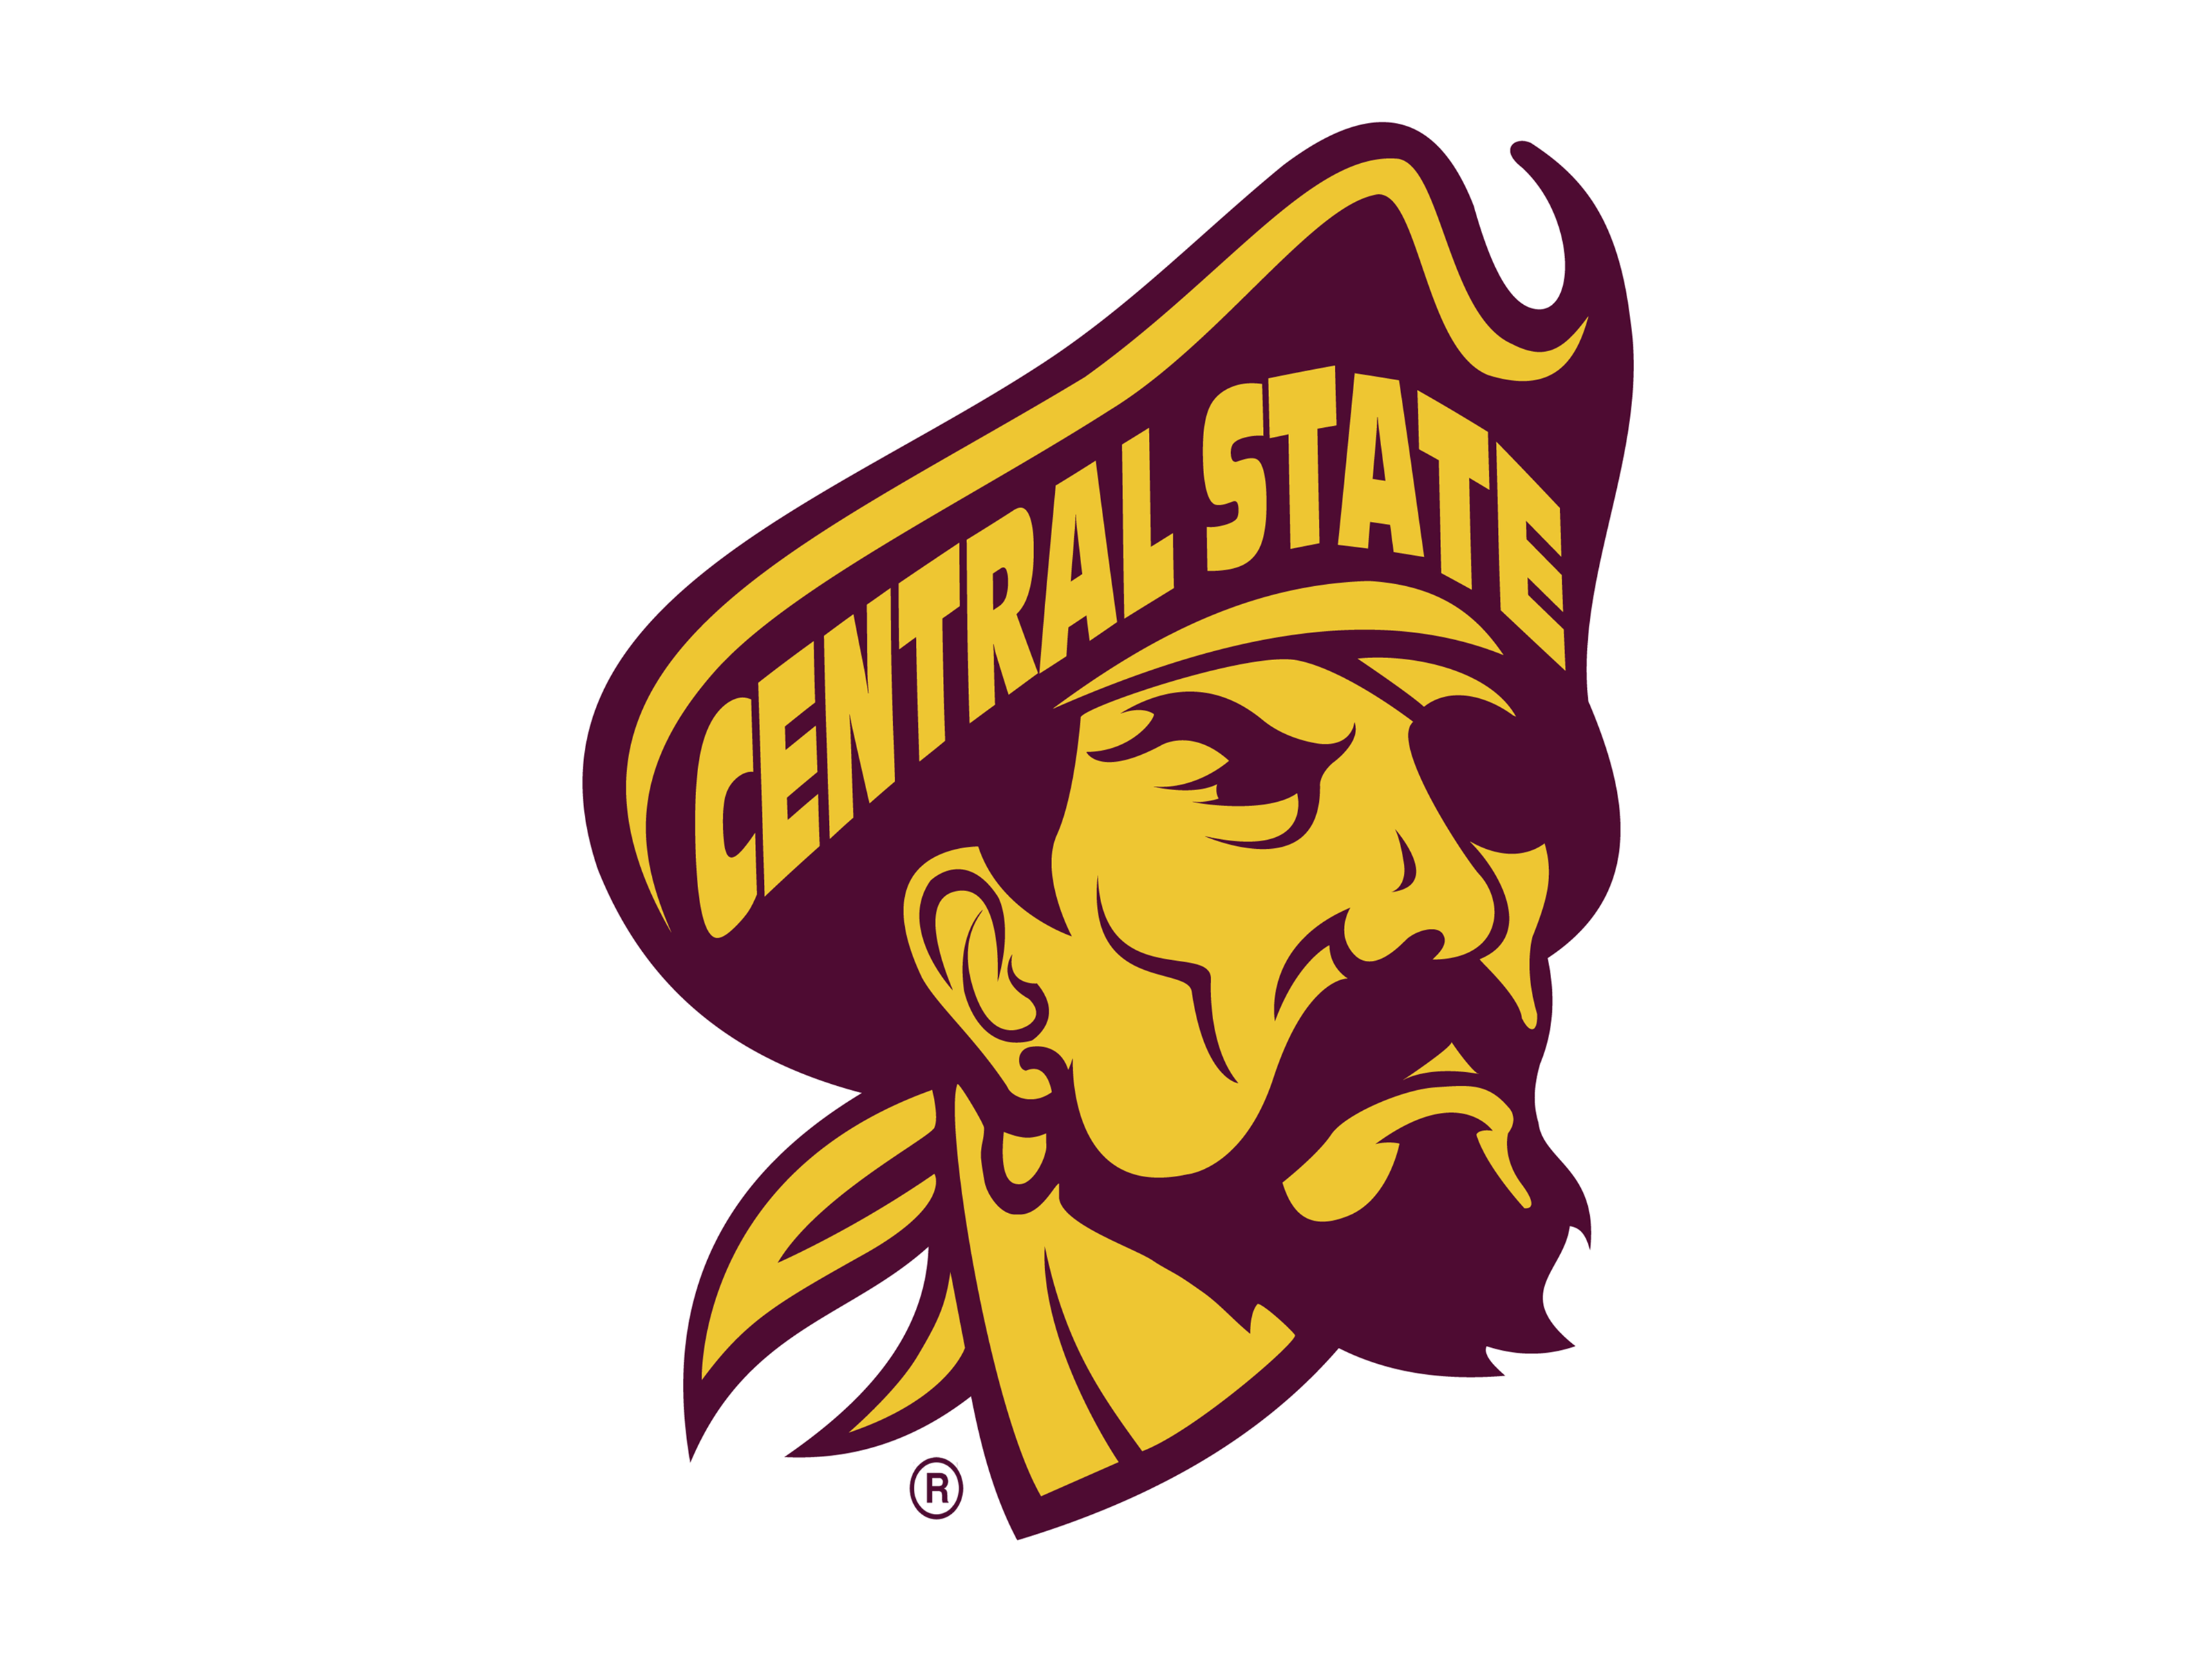 Central State